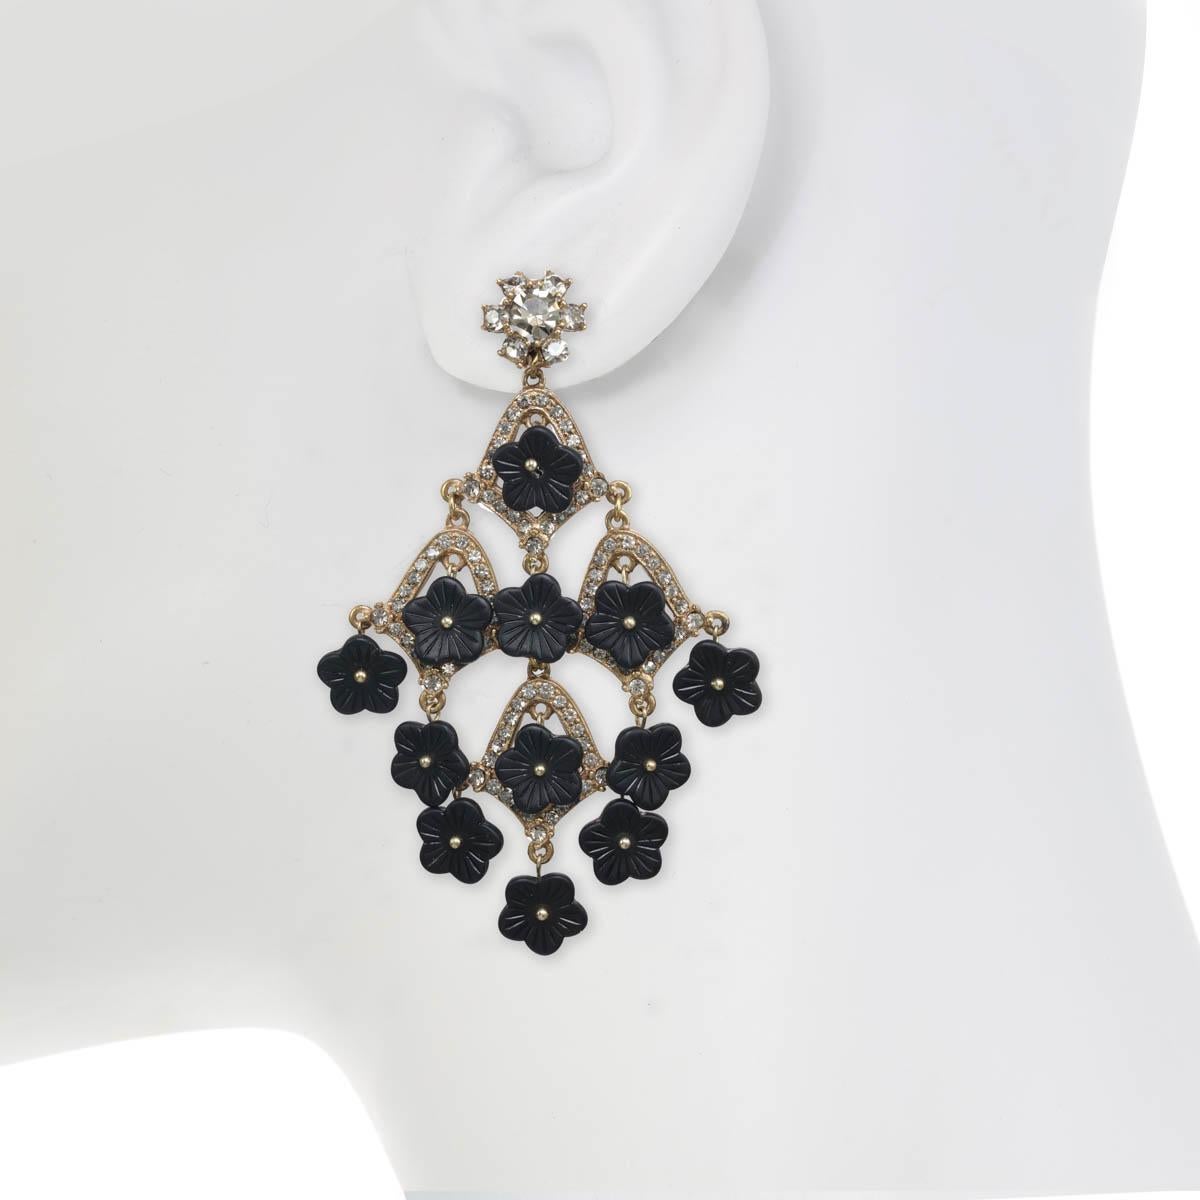 PLEASE NOTE: The pieces available are not vintage and are not reproductions.
CINER uses original models to produce our jewelry today. 
If you would like to custom order these earrings, please message us!

The perfect chandelier for every season,